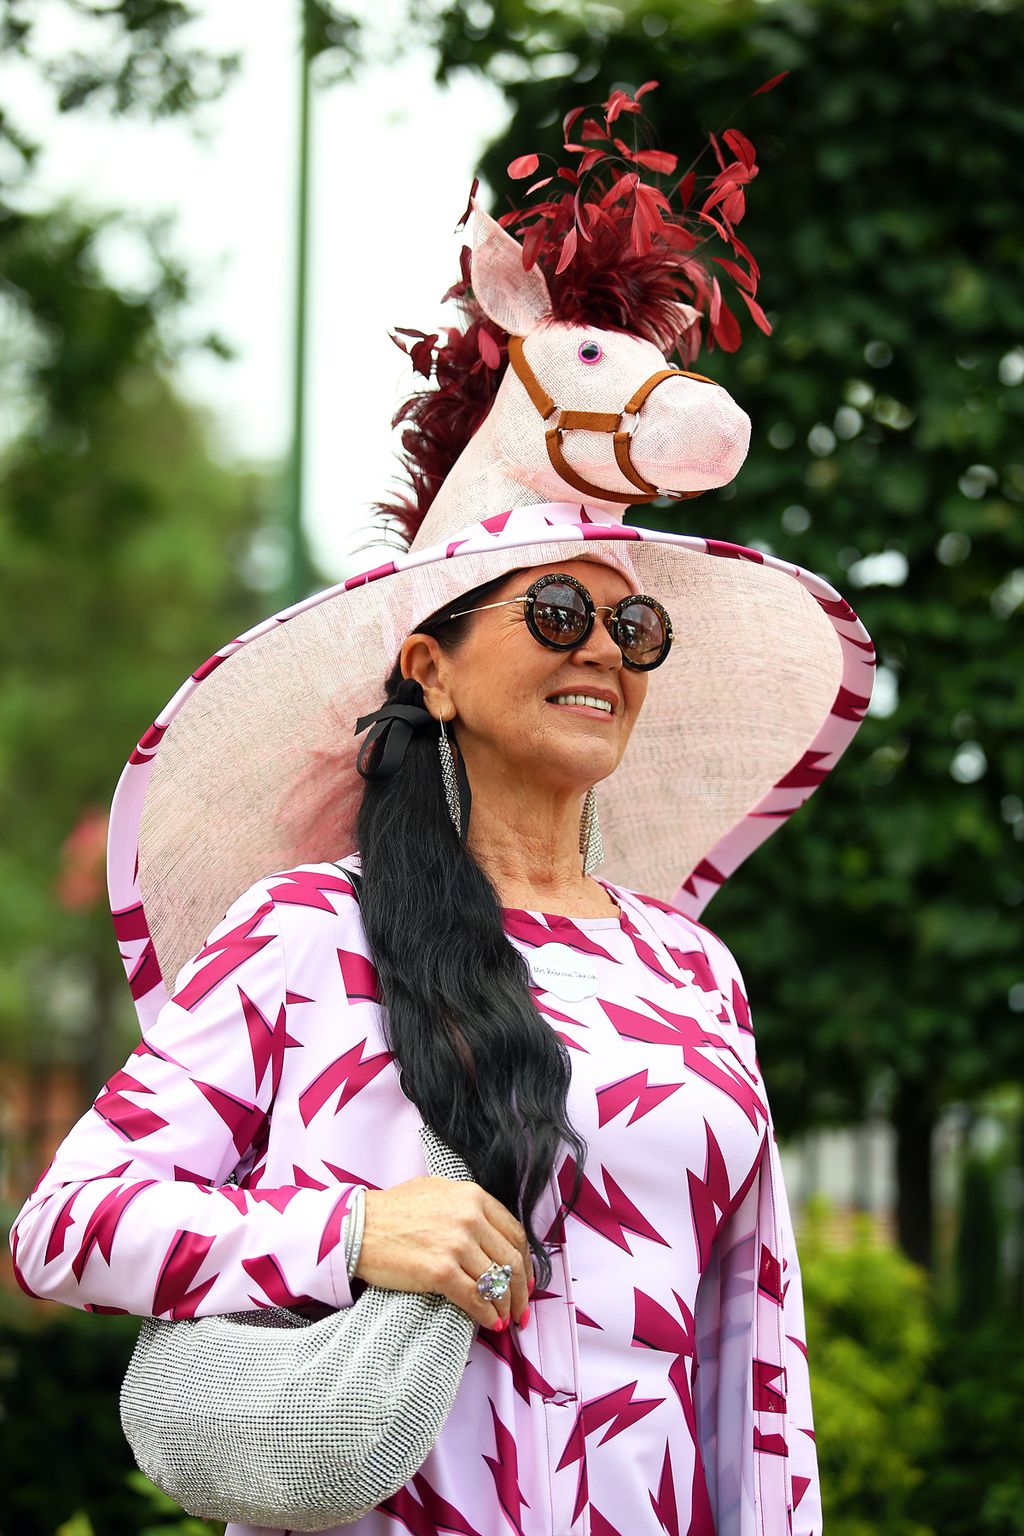 Forrás: Getty Images for Ascot Racecours/2019 Getty Images/Bryn Lennon 